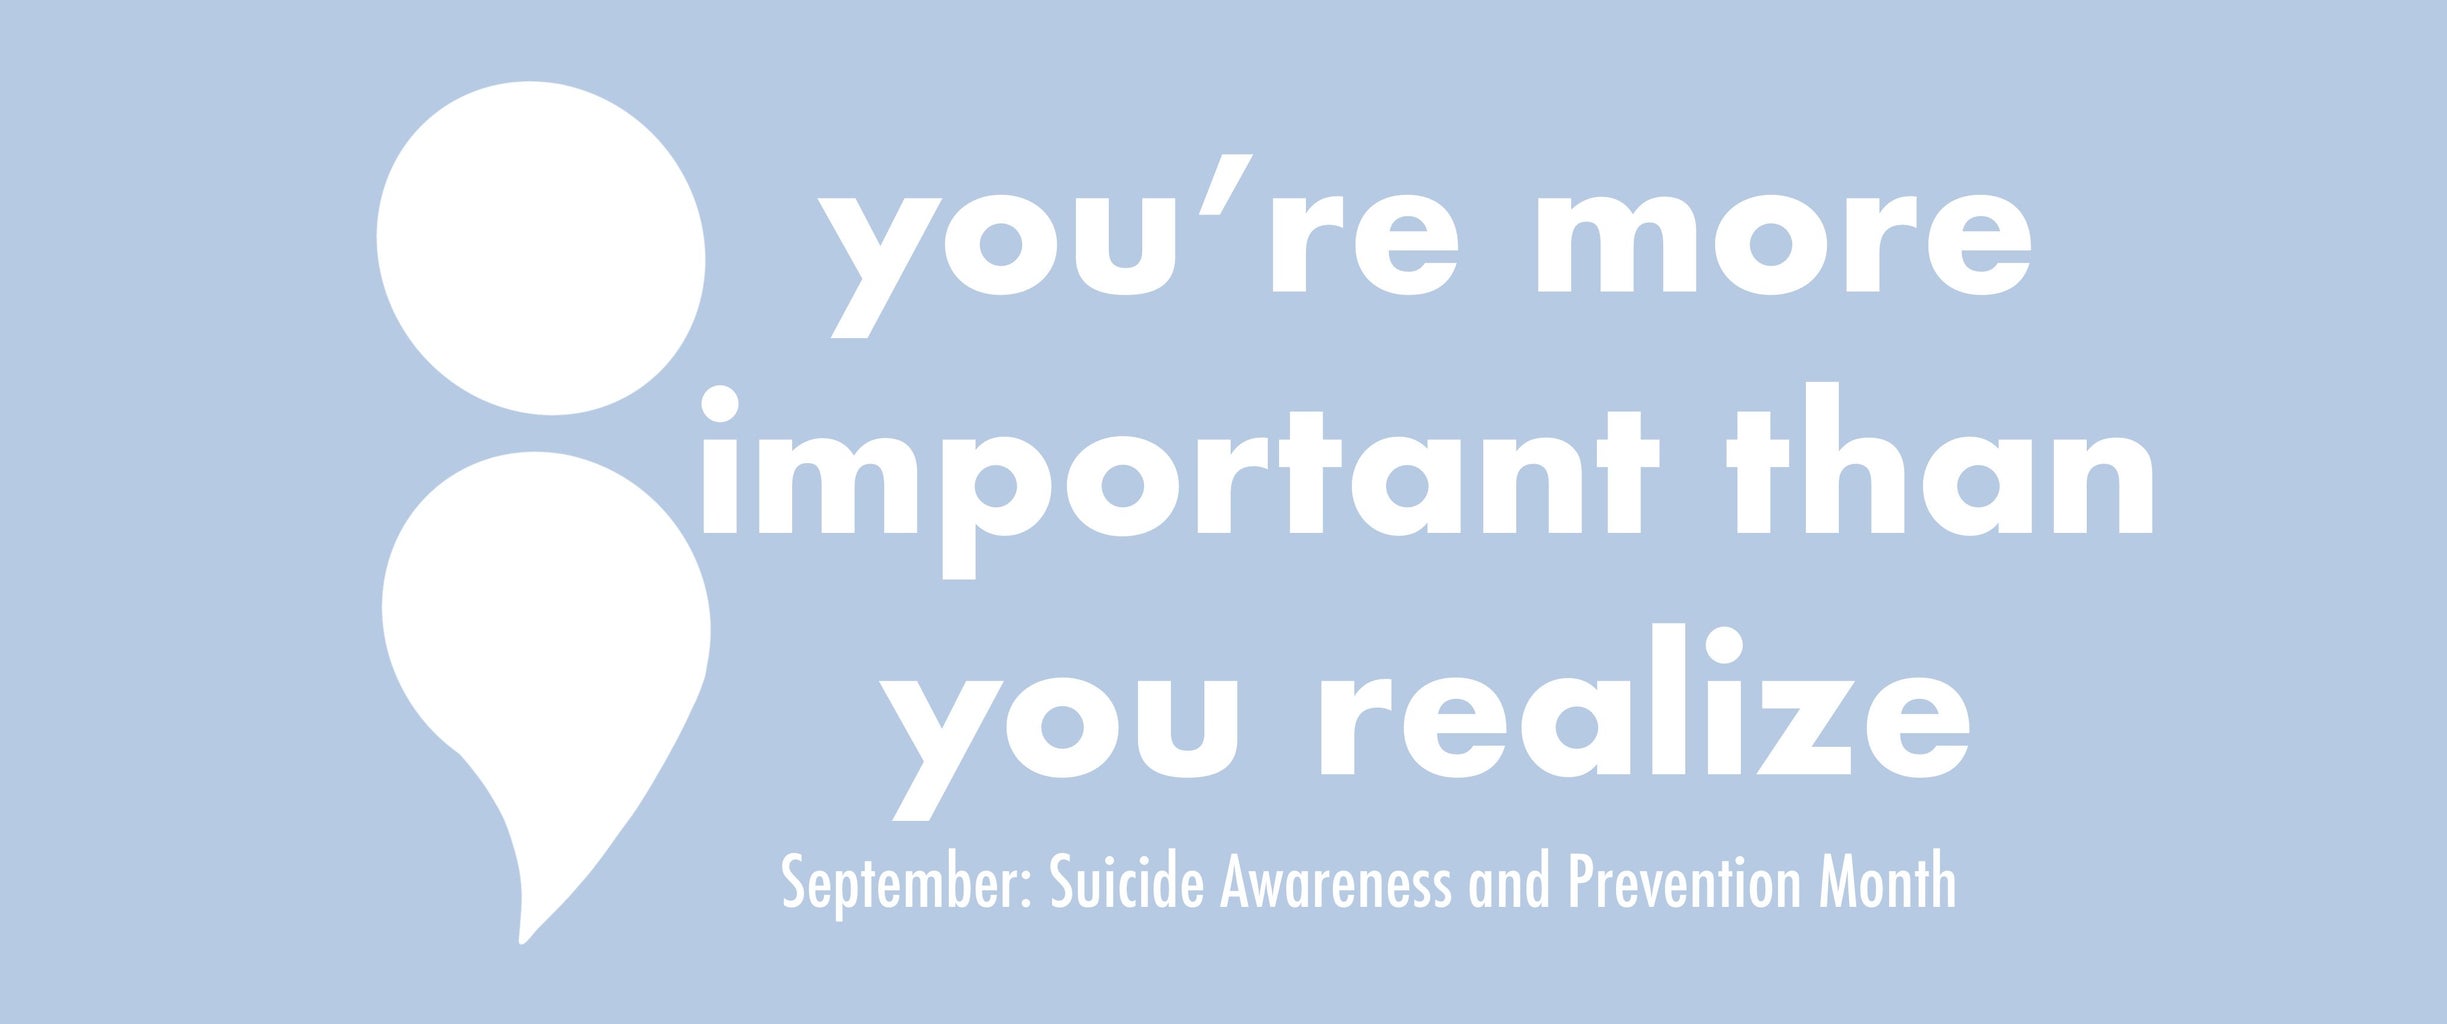 Suicide prevention you’re more important than you realize